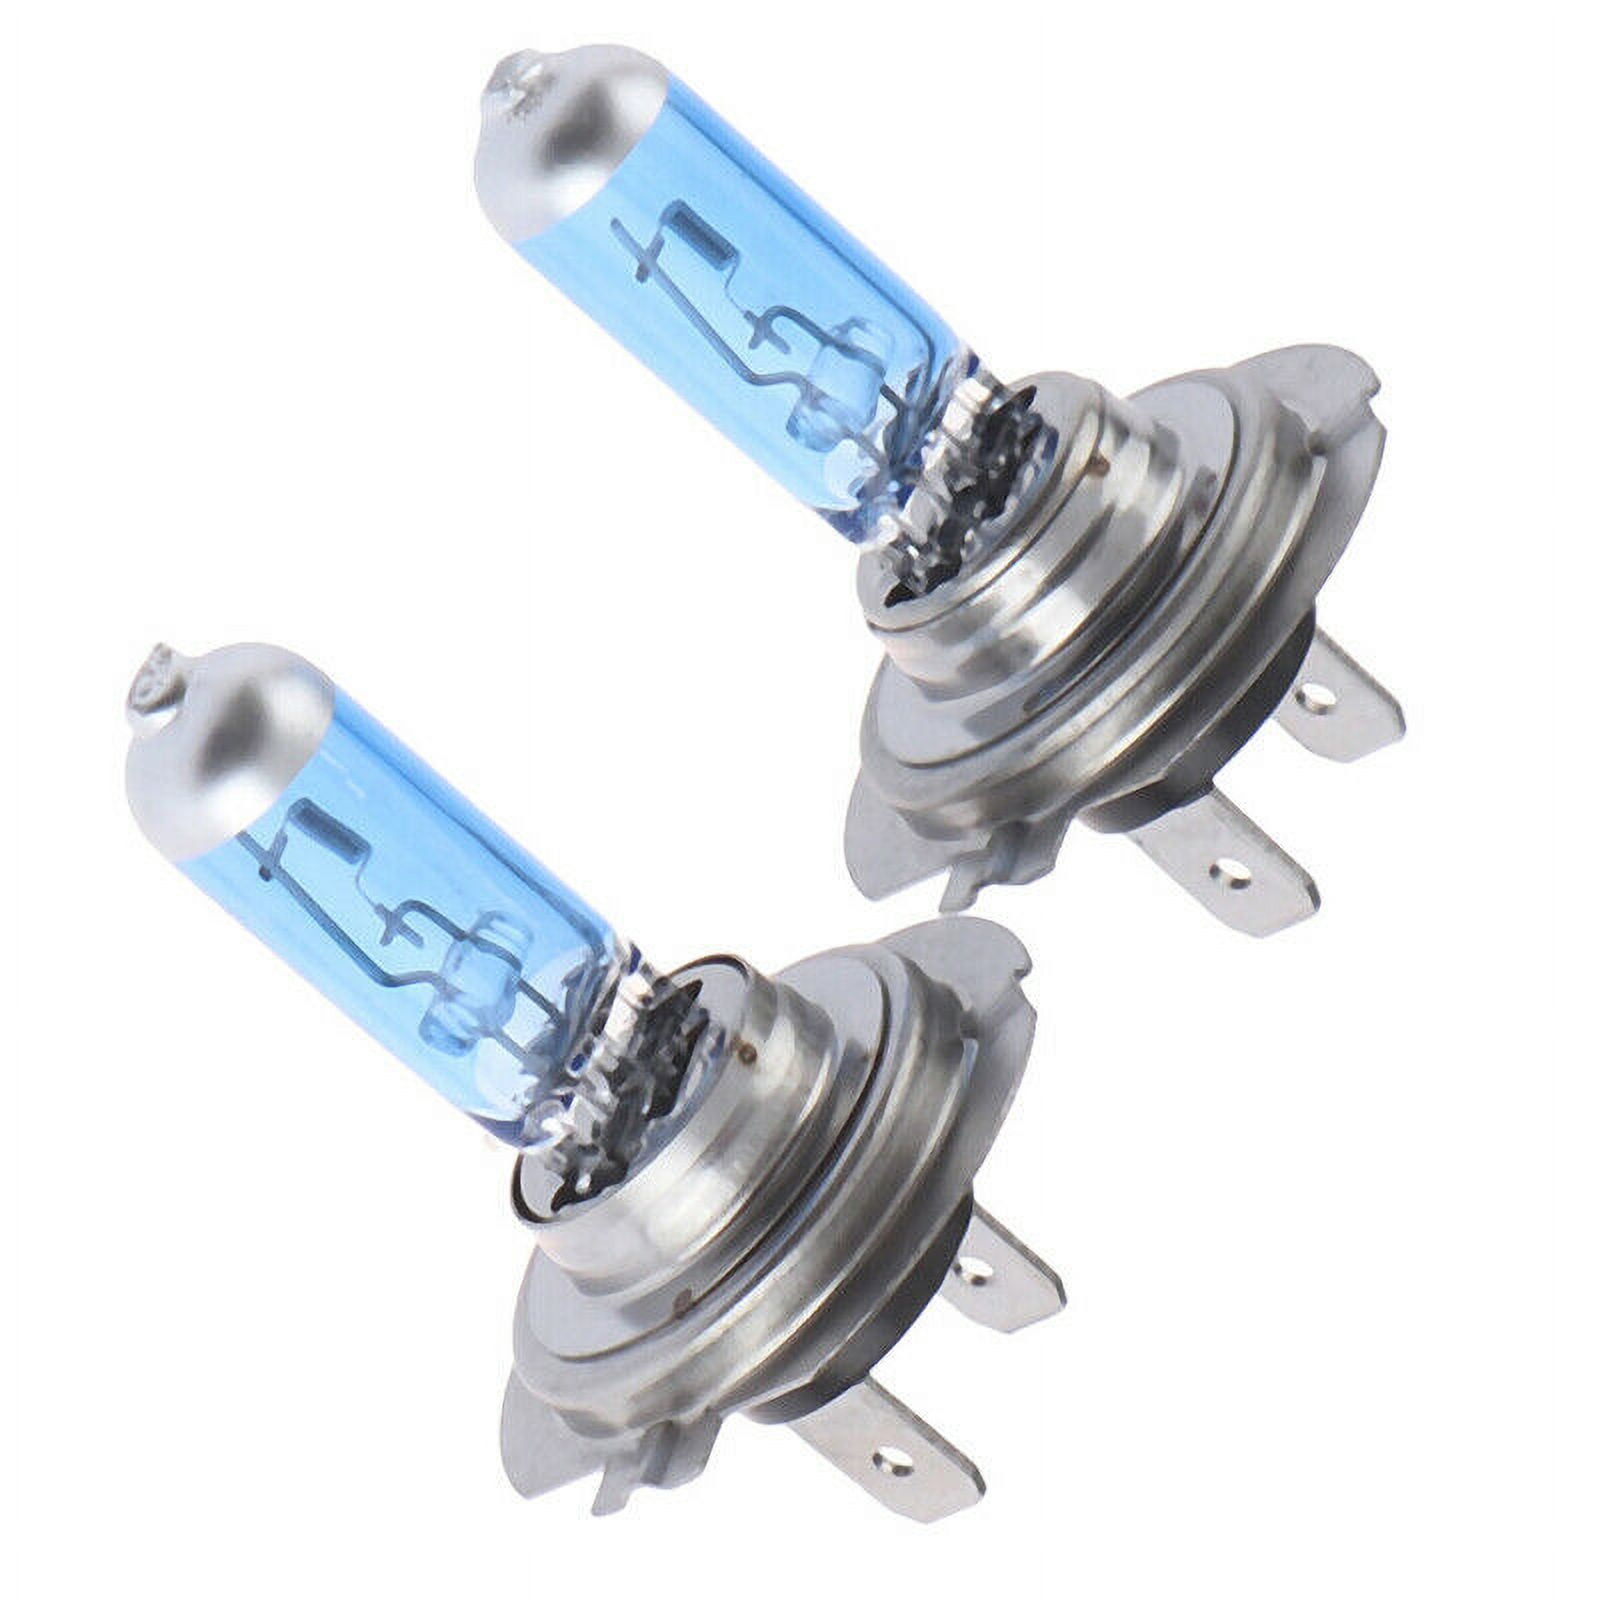 NEWBROWN H7 Halogen Headlight Bulb with Super White Light Long Life  Replacement PX26D 12V/55W (2 Pack)